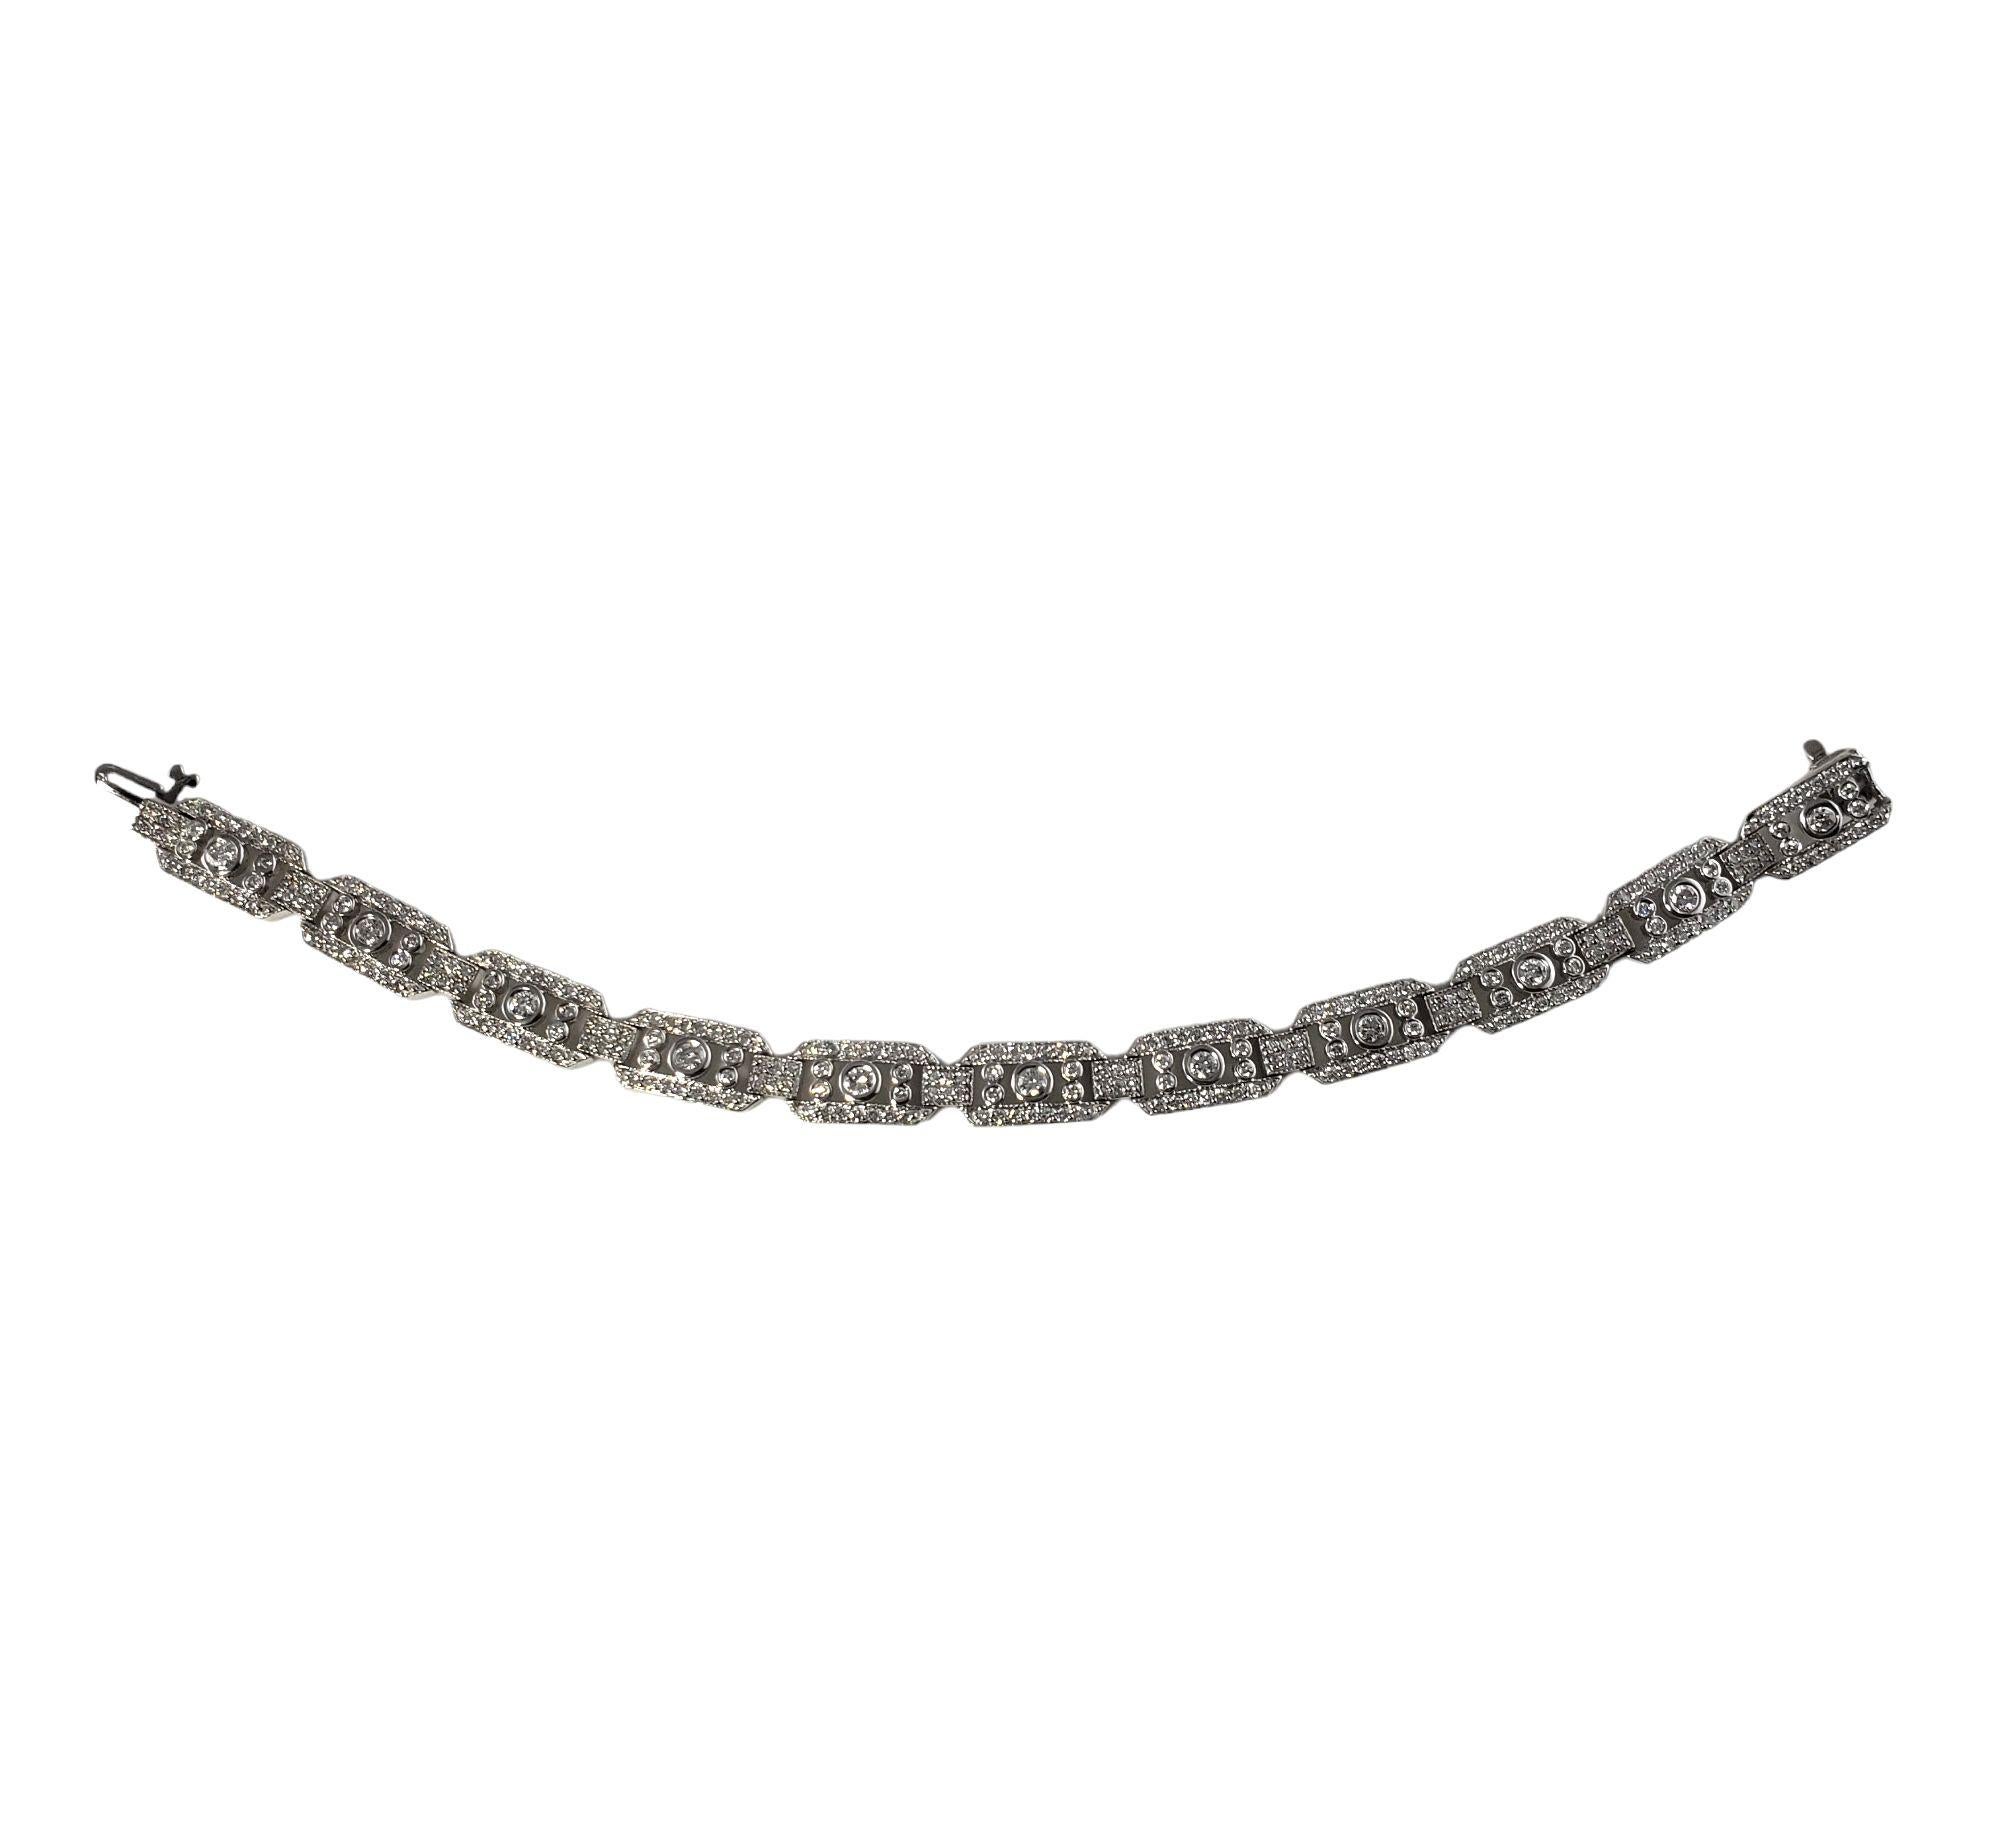 Vintage 14 Karat White Gold and Diamond Bracelet-

This sparkling bracelet features 275 round brilliant cut diamonds set in beautifully detailed 14K white gold. Width: 8 mm.

Total diamond weight: 3.30 ct.

Diamond color: G-H

Diamond clarity: